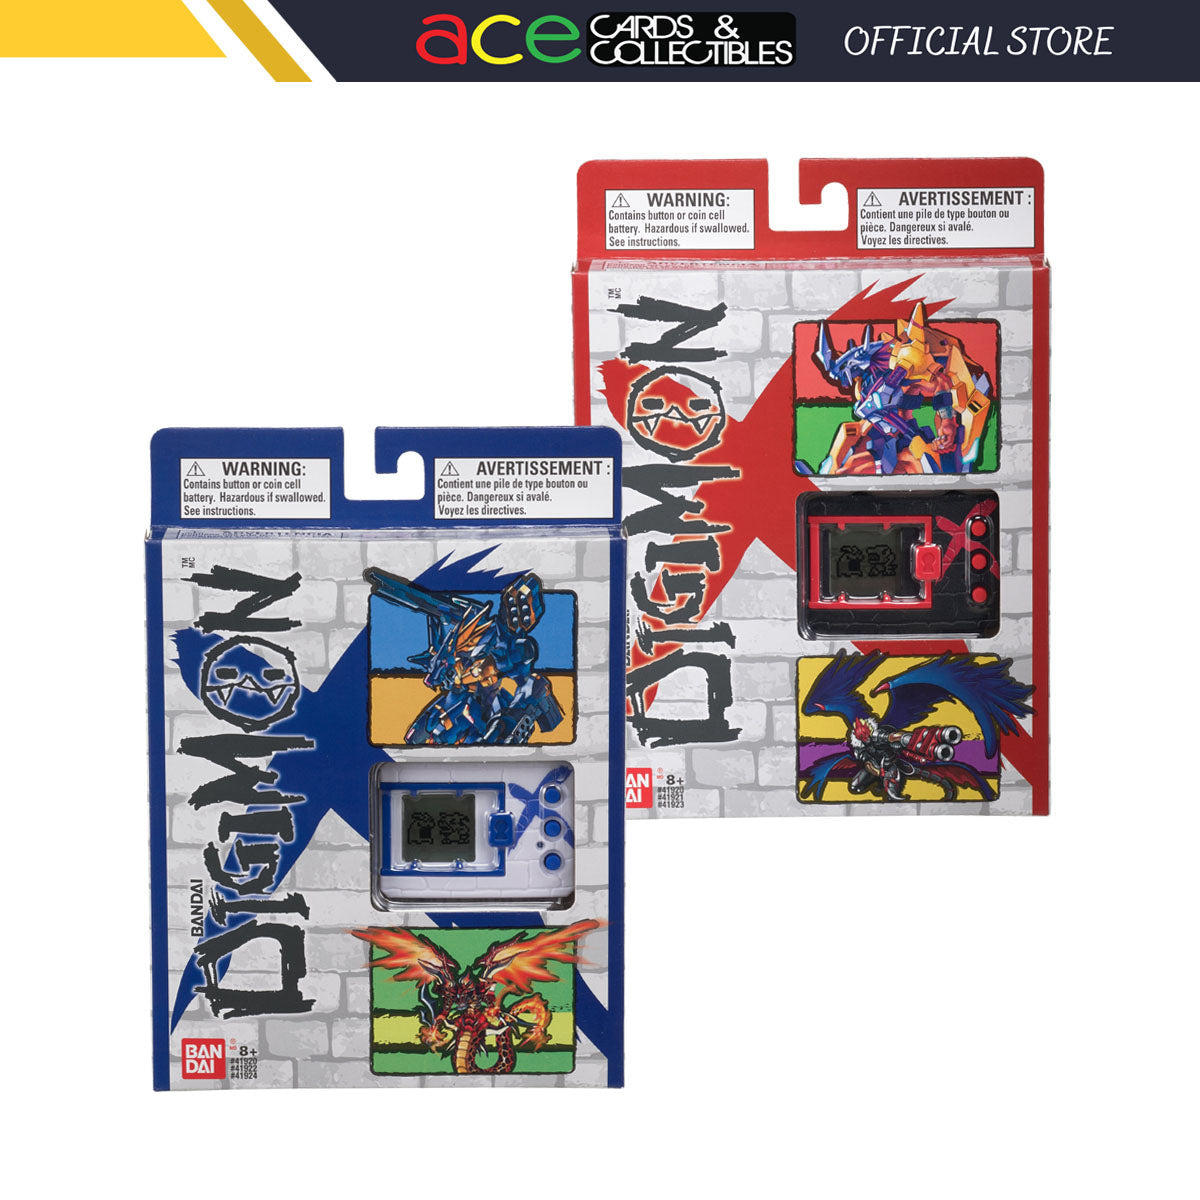 Digimon Digital Monster X ver. 1 (Digivice Asia)-Black & Red-Bandai-Ace Cards & Collectibles